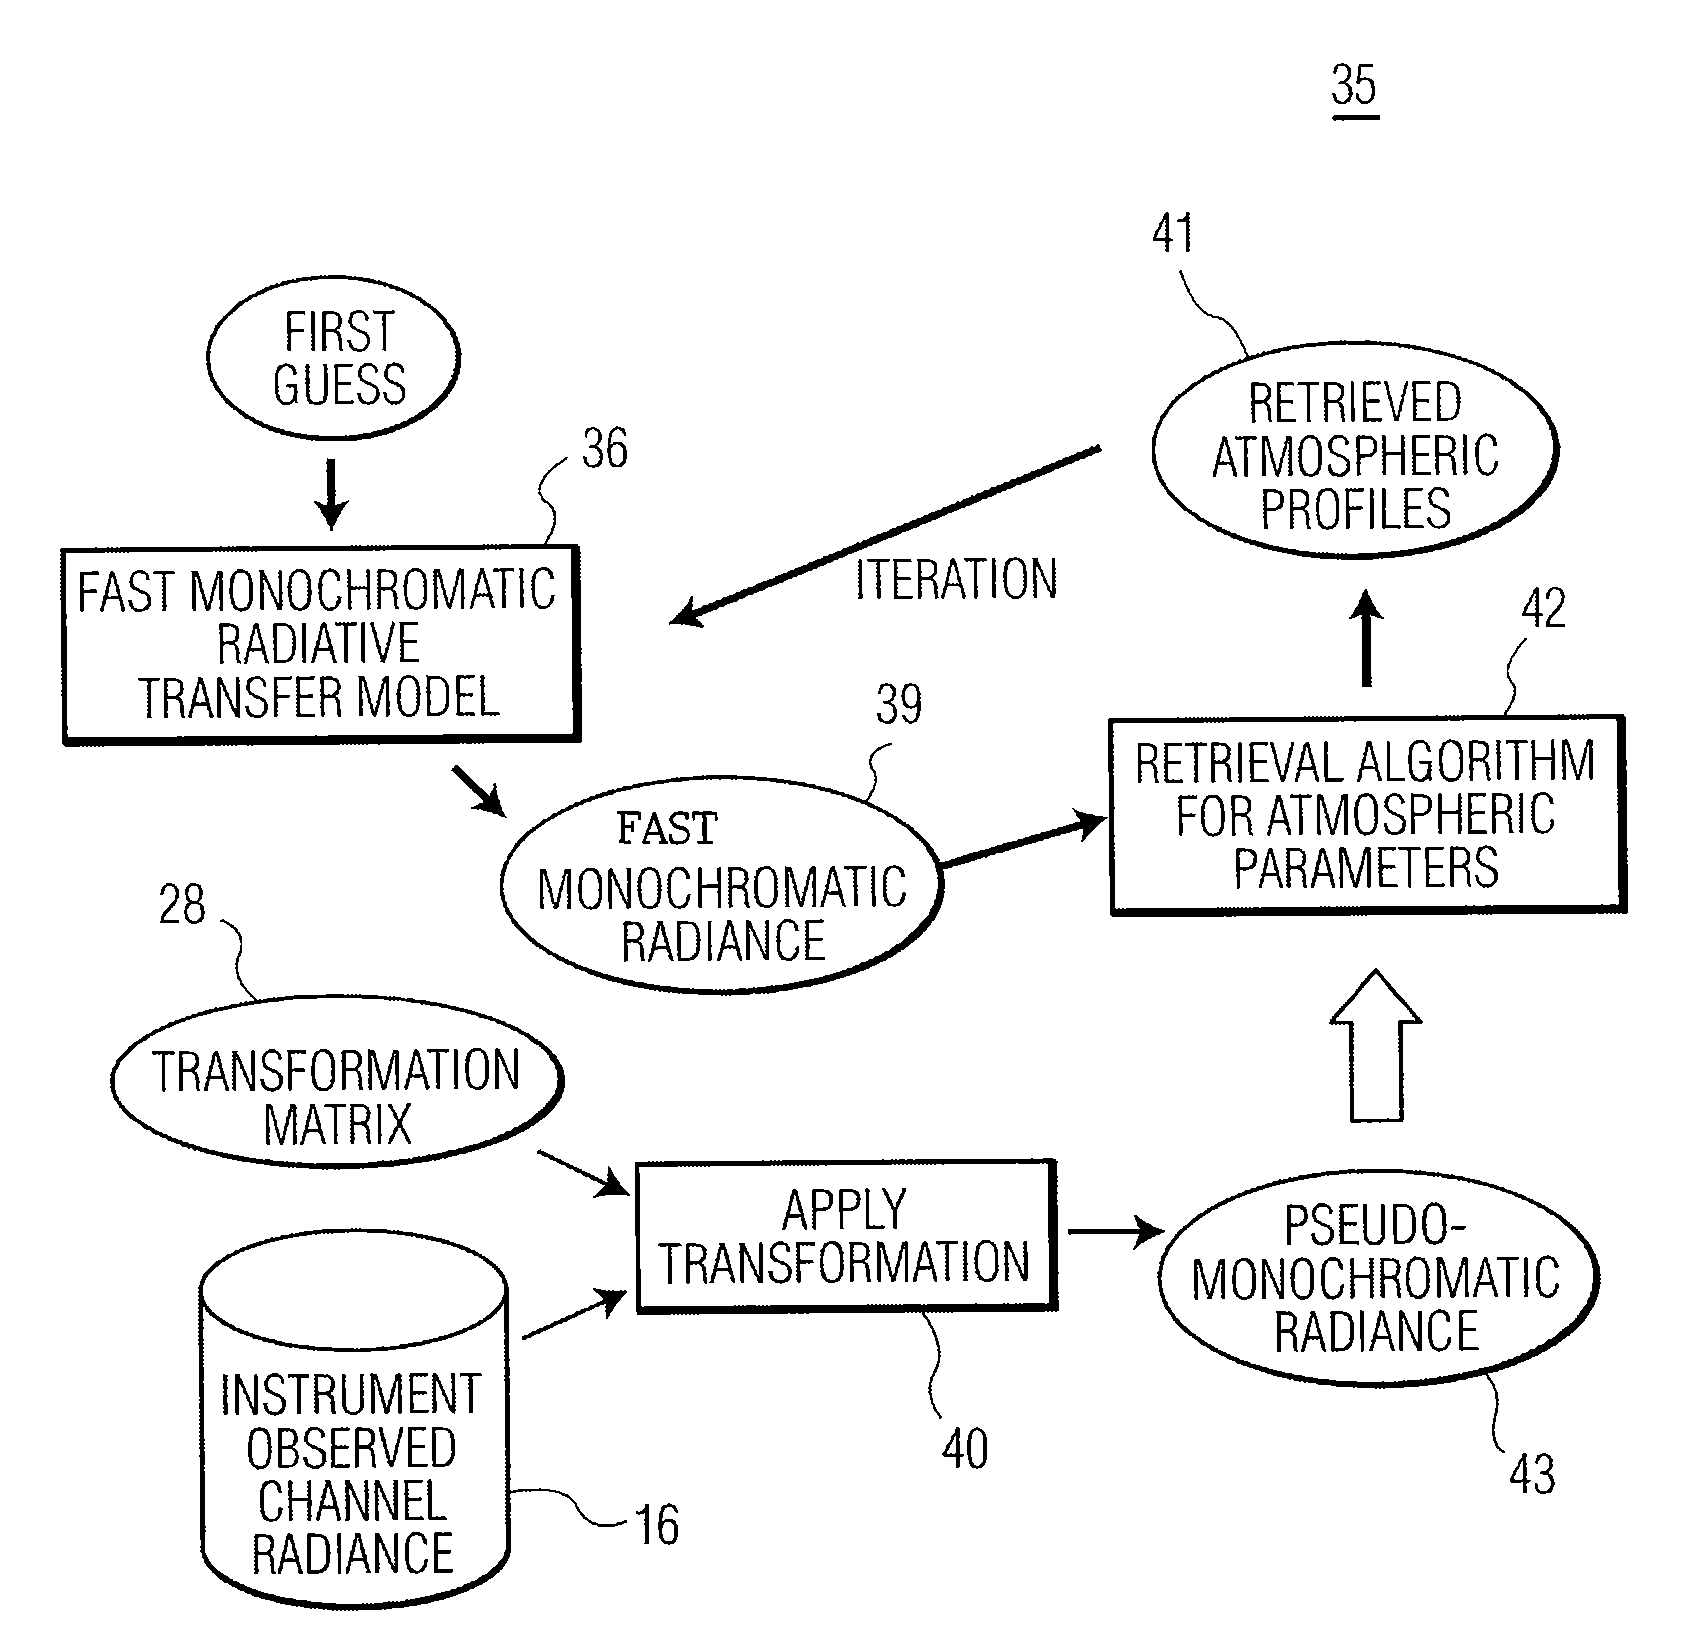 Method and system for determining atmospheric profiles using a physical retrieval algorithm